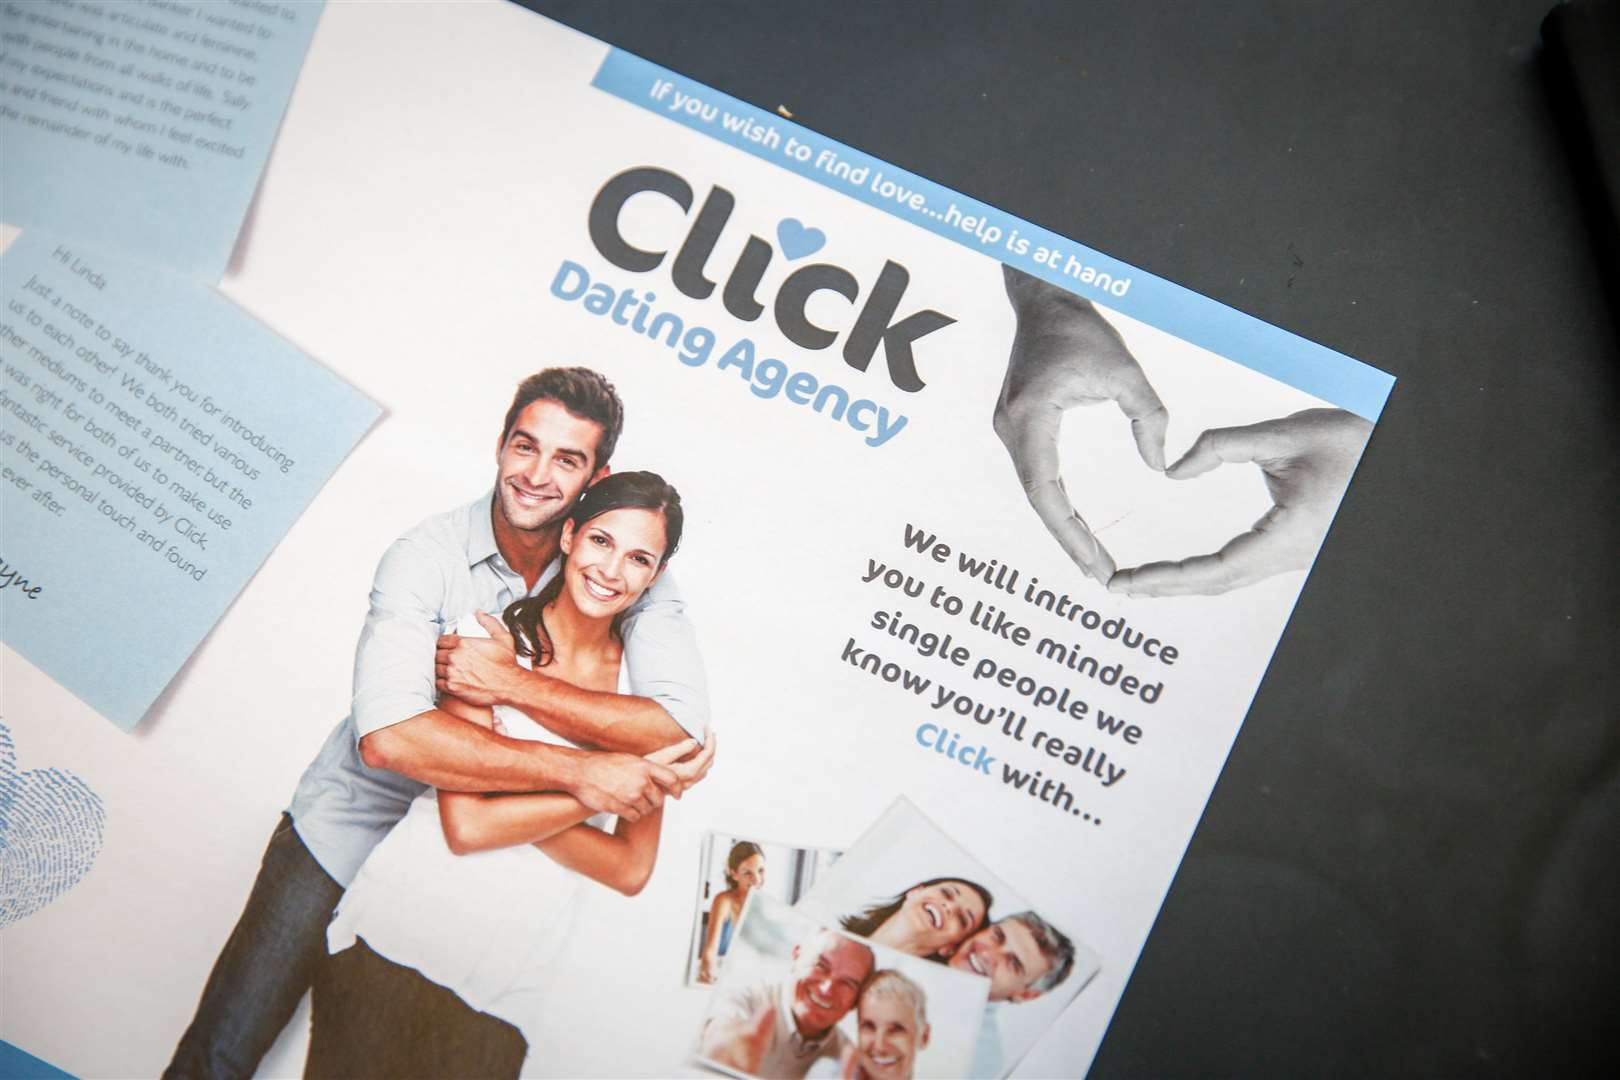 Click Events Dating, Maidstone Business Terrace. Feature on reporter Guy being profiled for potential dates. Picture: Matthew Walker. (7104079)